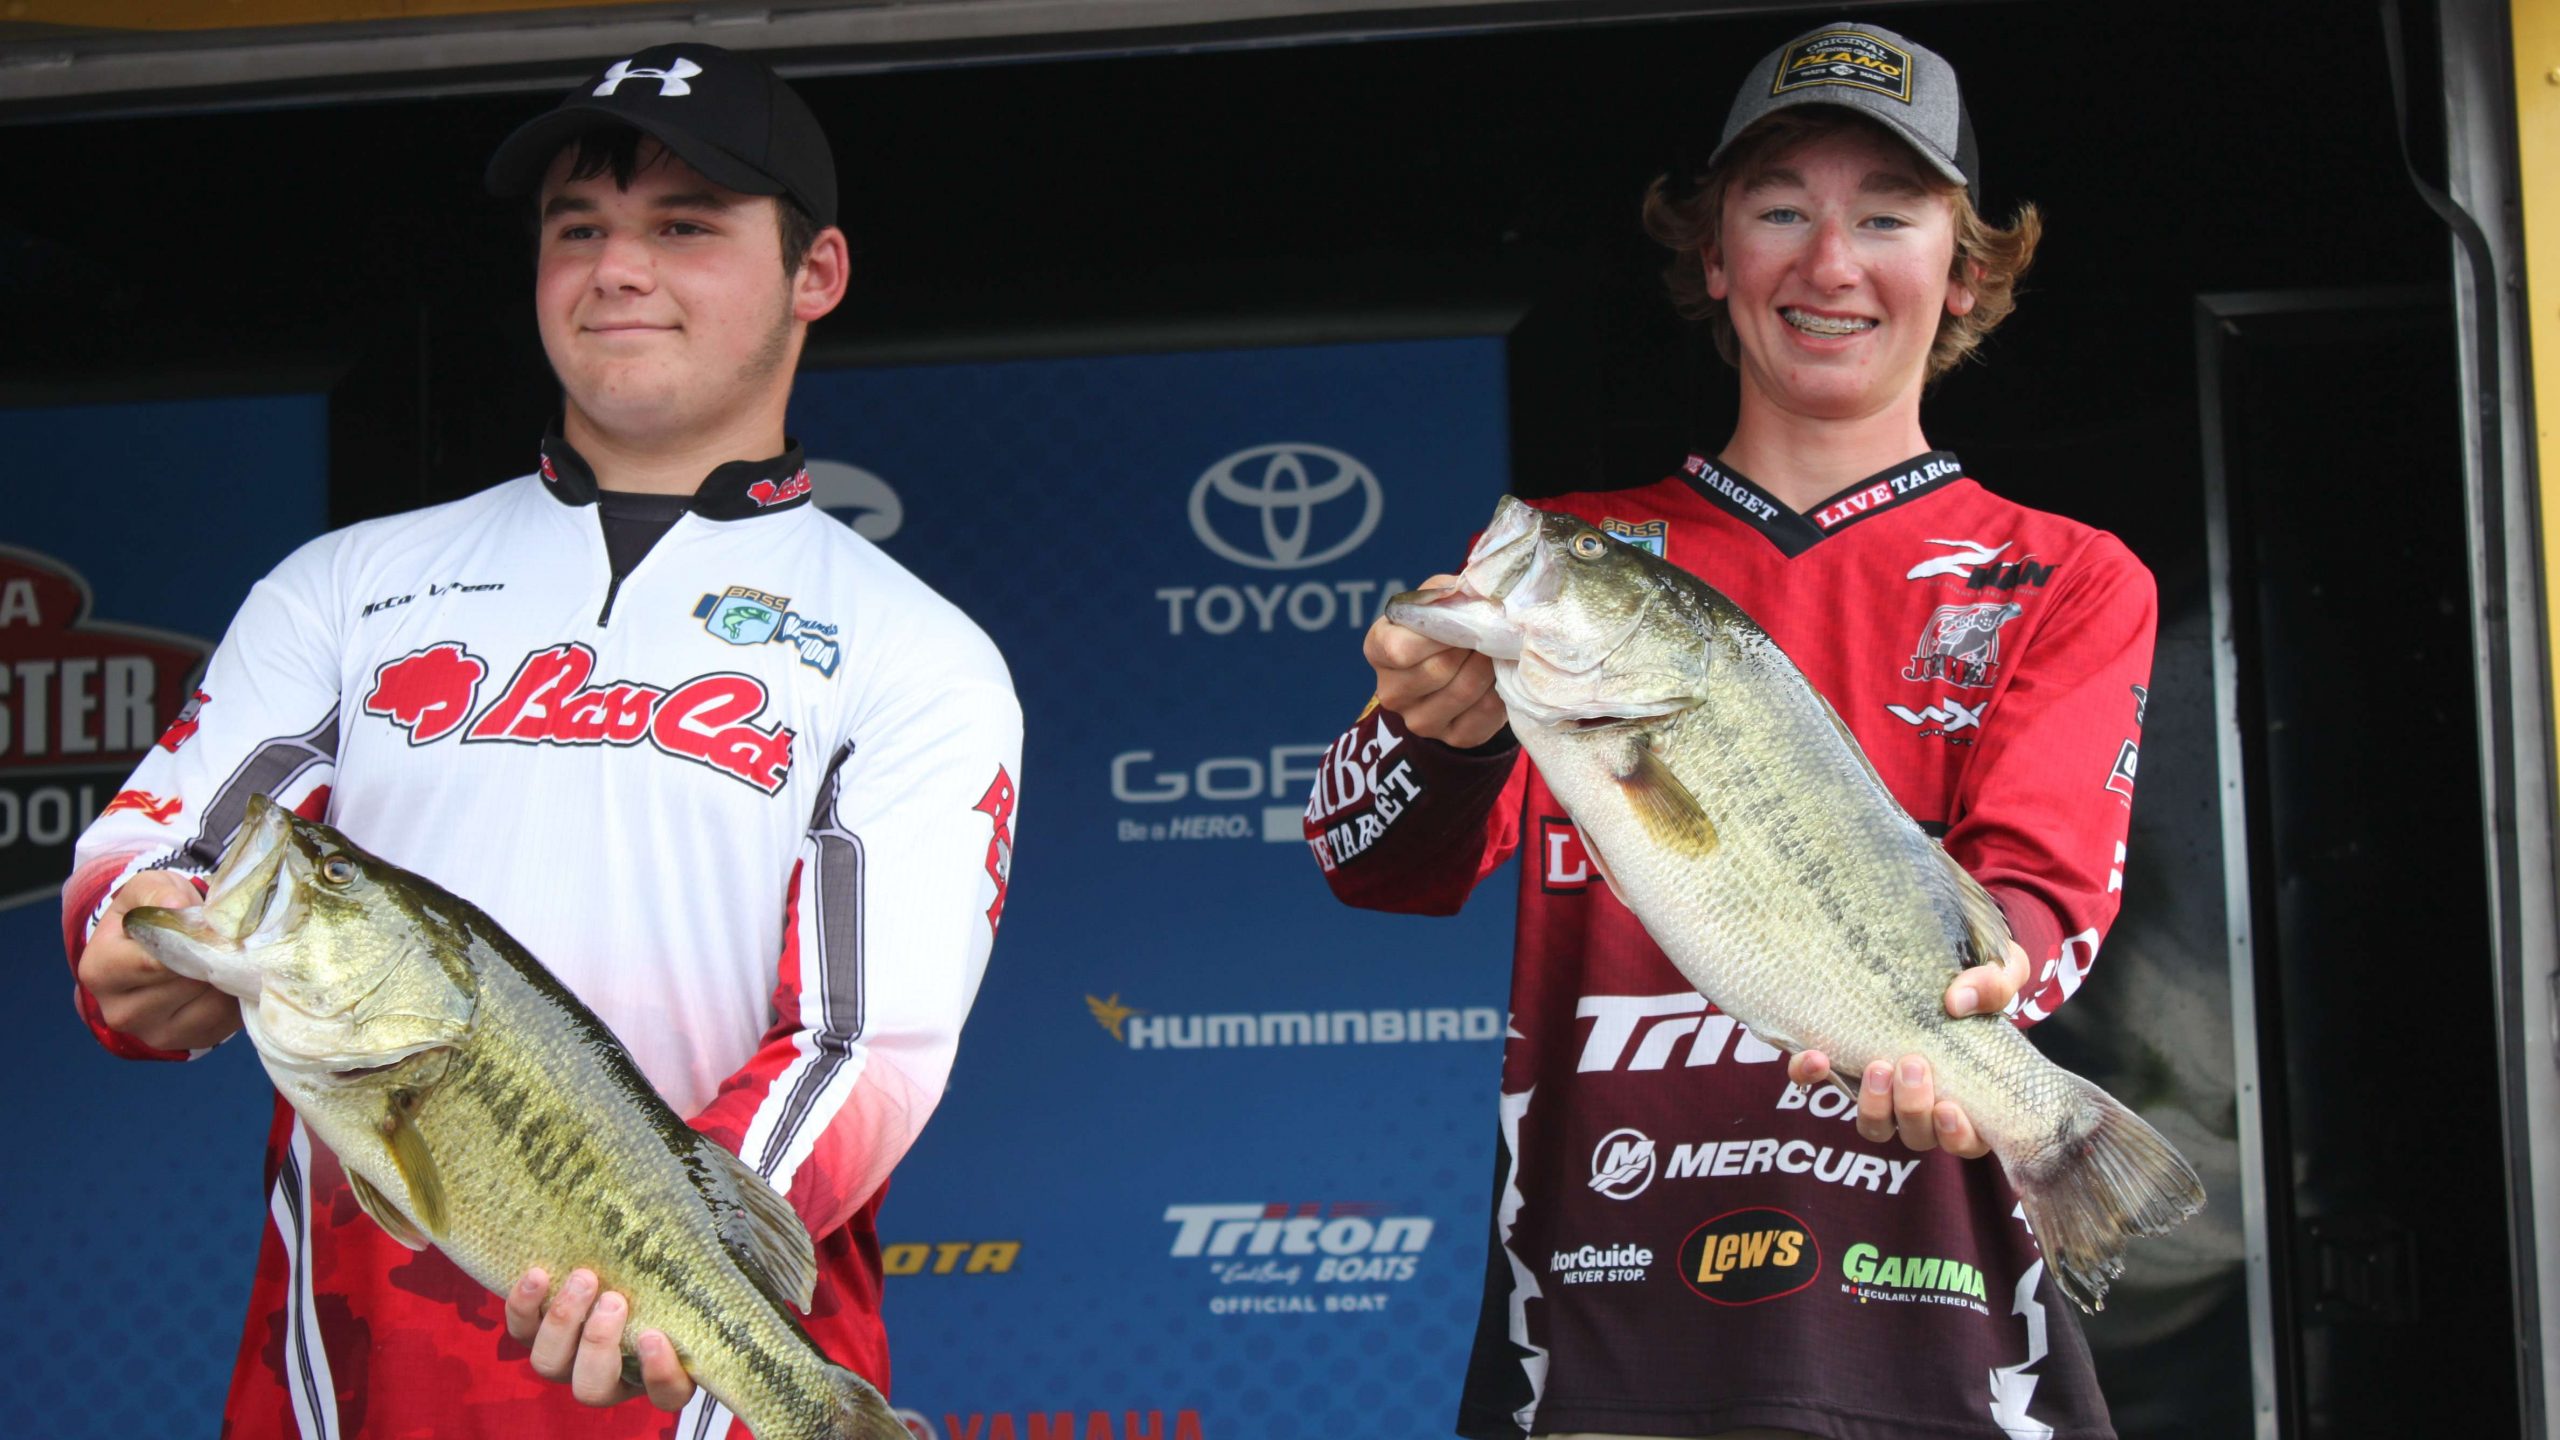 McCoy Vereen and Beau Browning of Team Arkansas pulled in a a 14-9 limit on Tuesday, which put them well ahead of the field after Day 1.